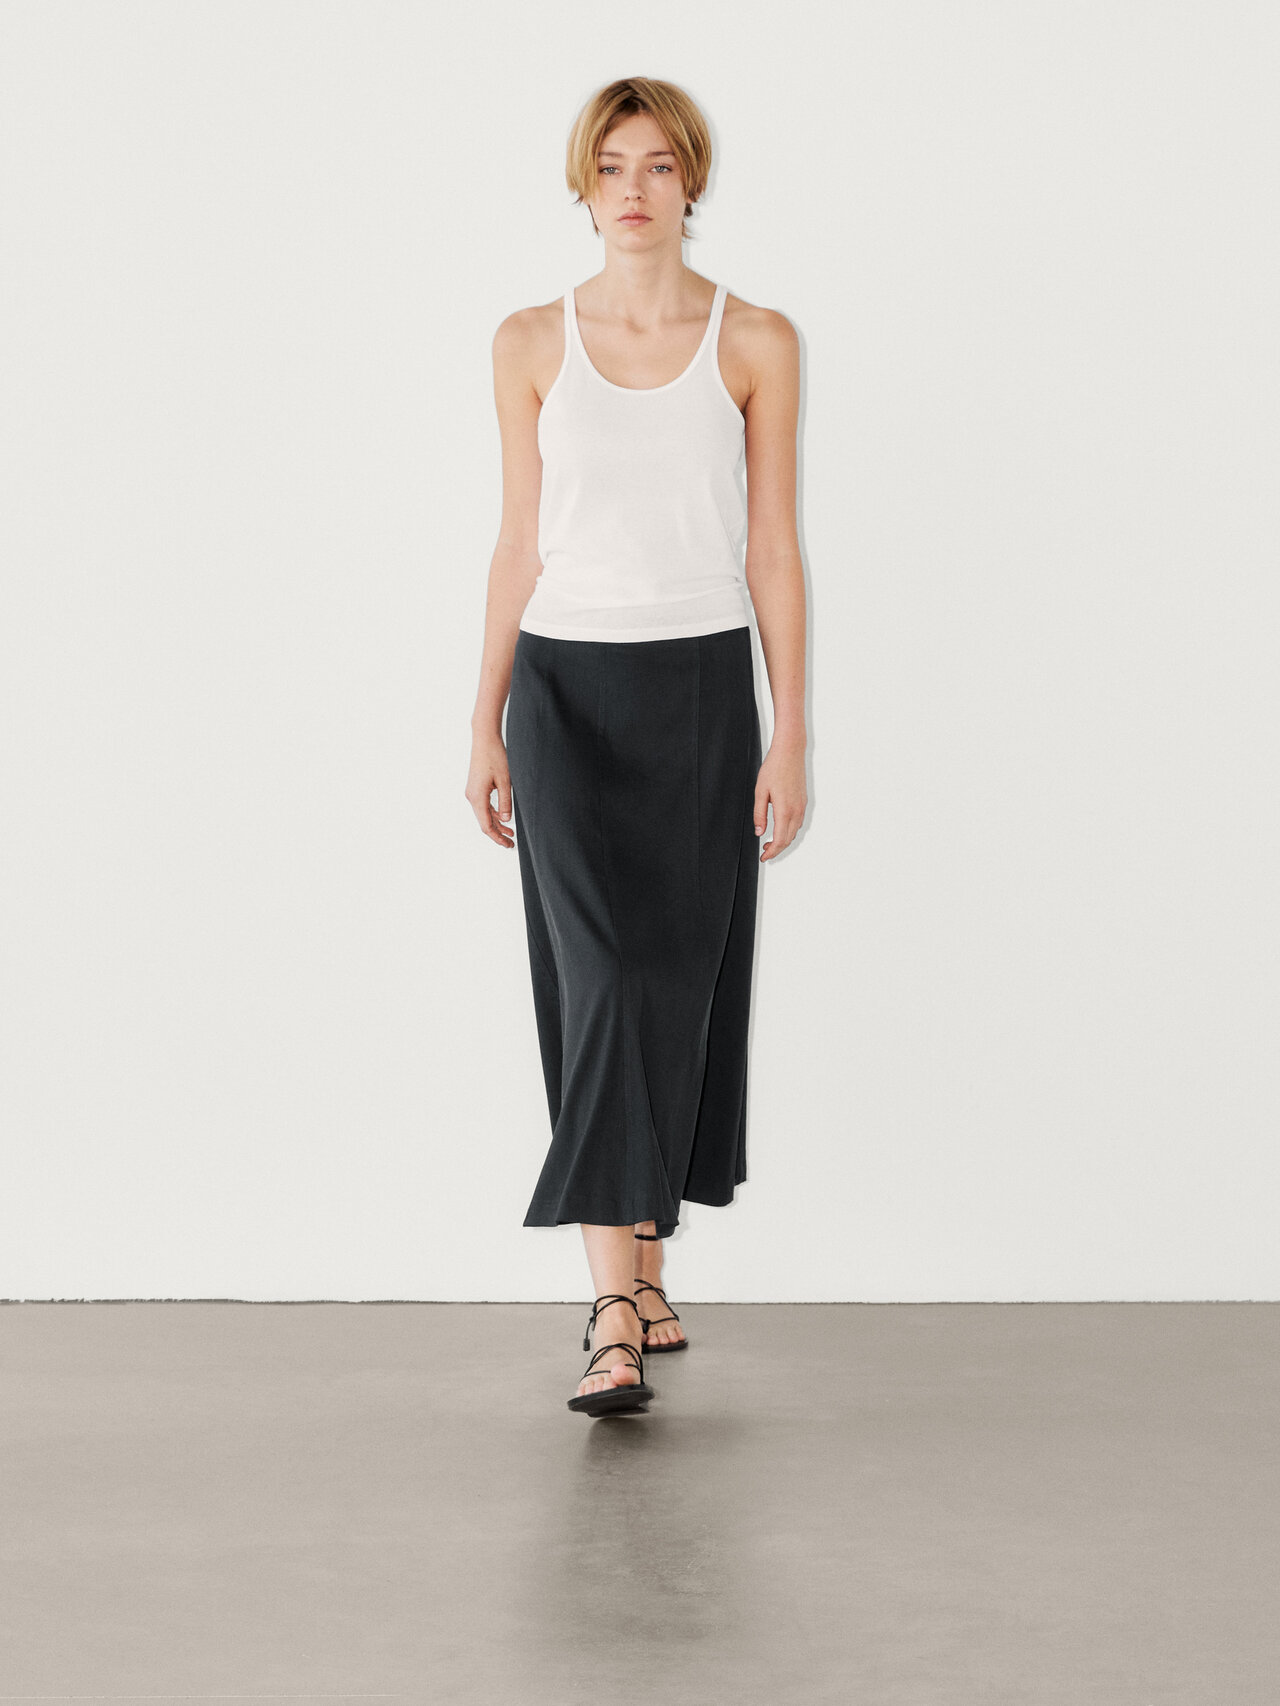 Long flared skirt with topstitching detail